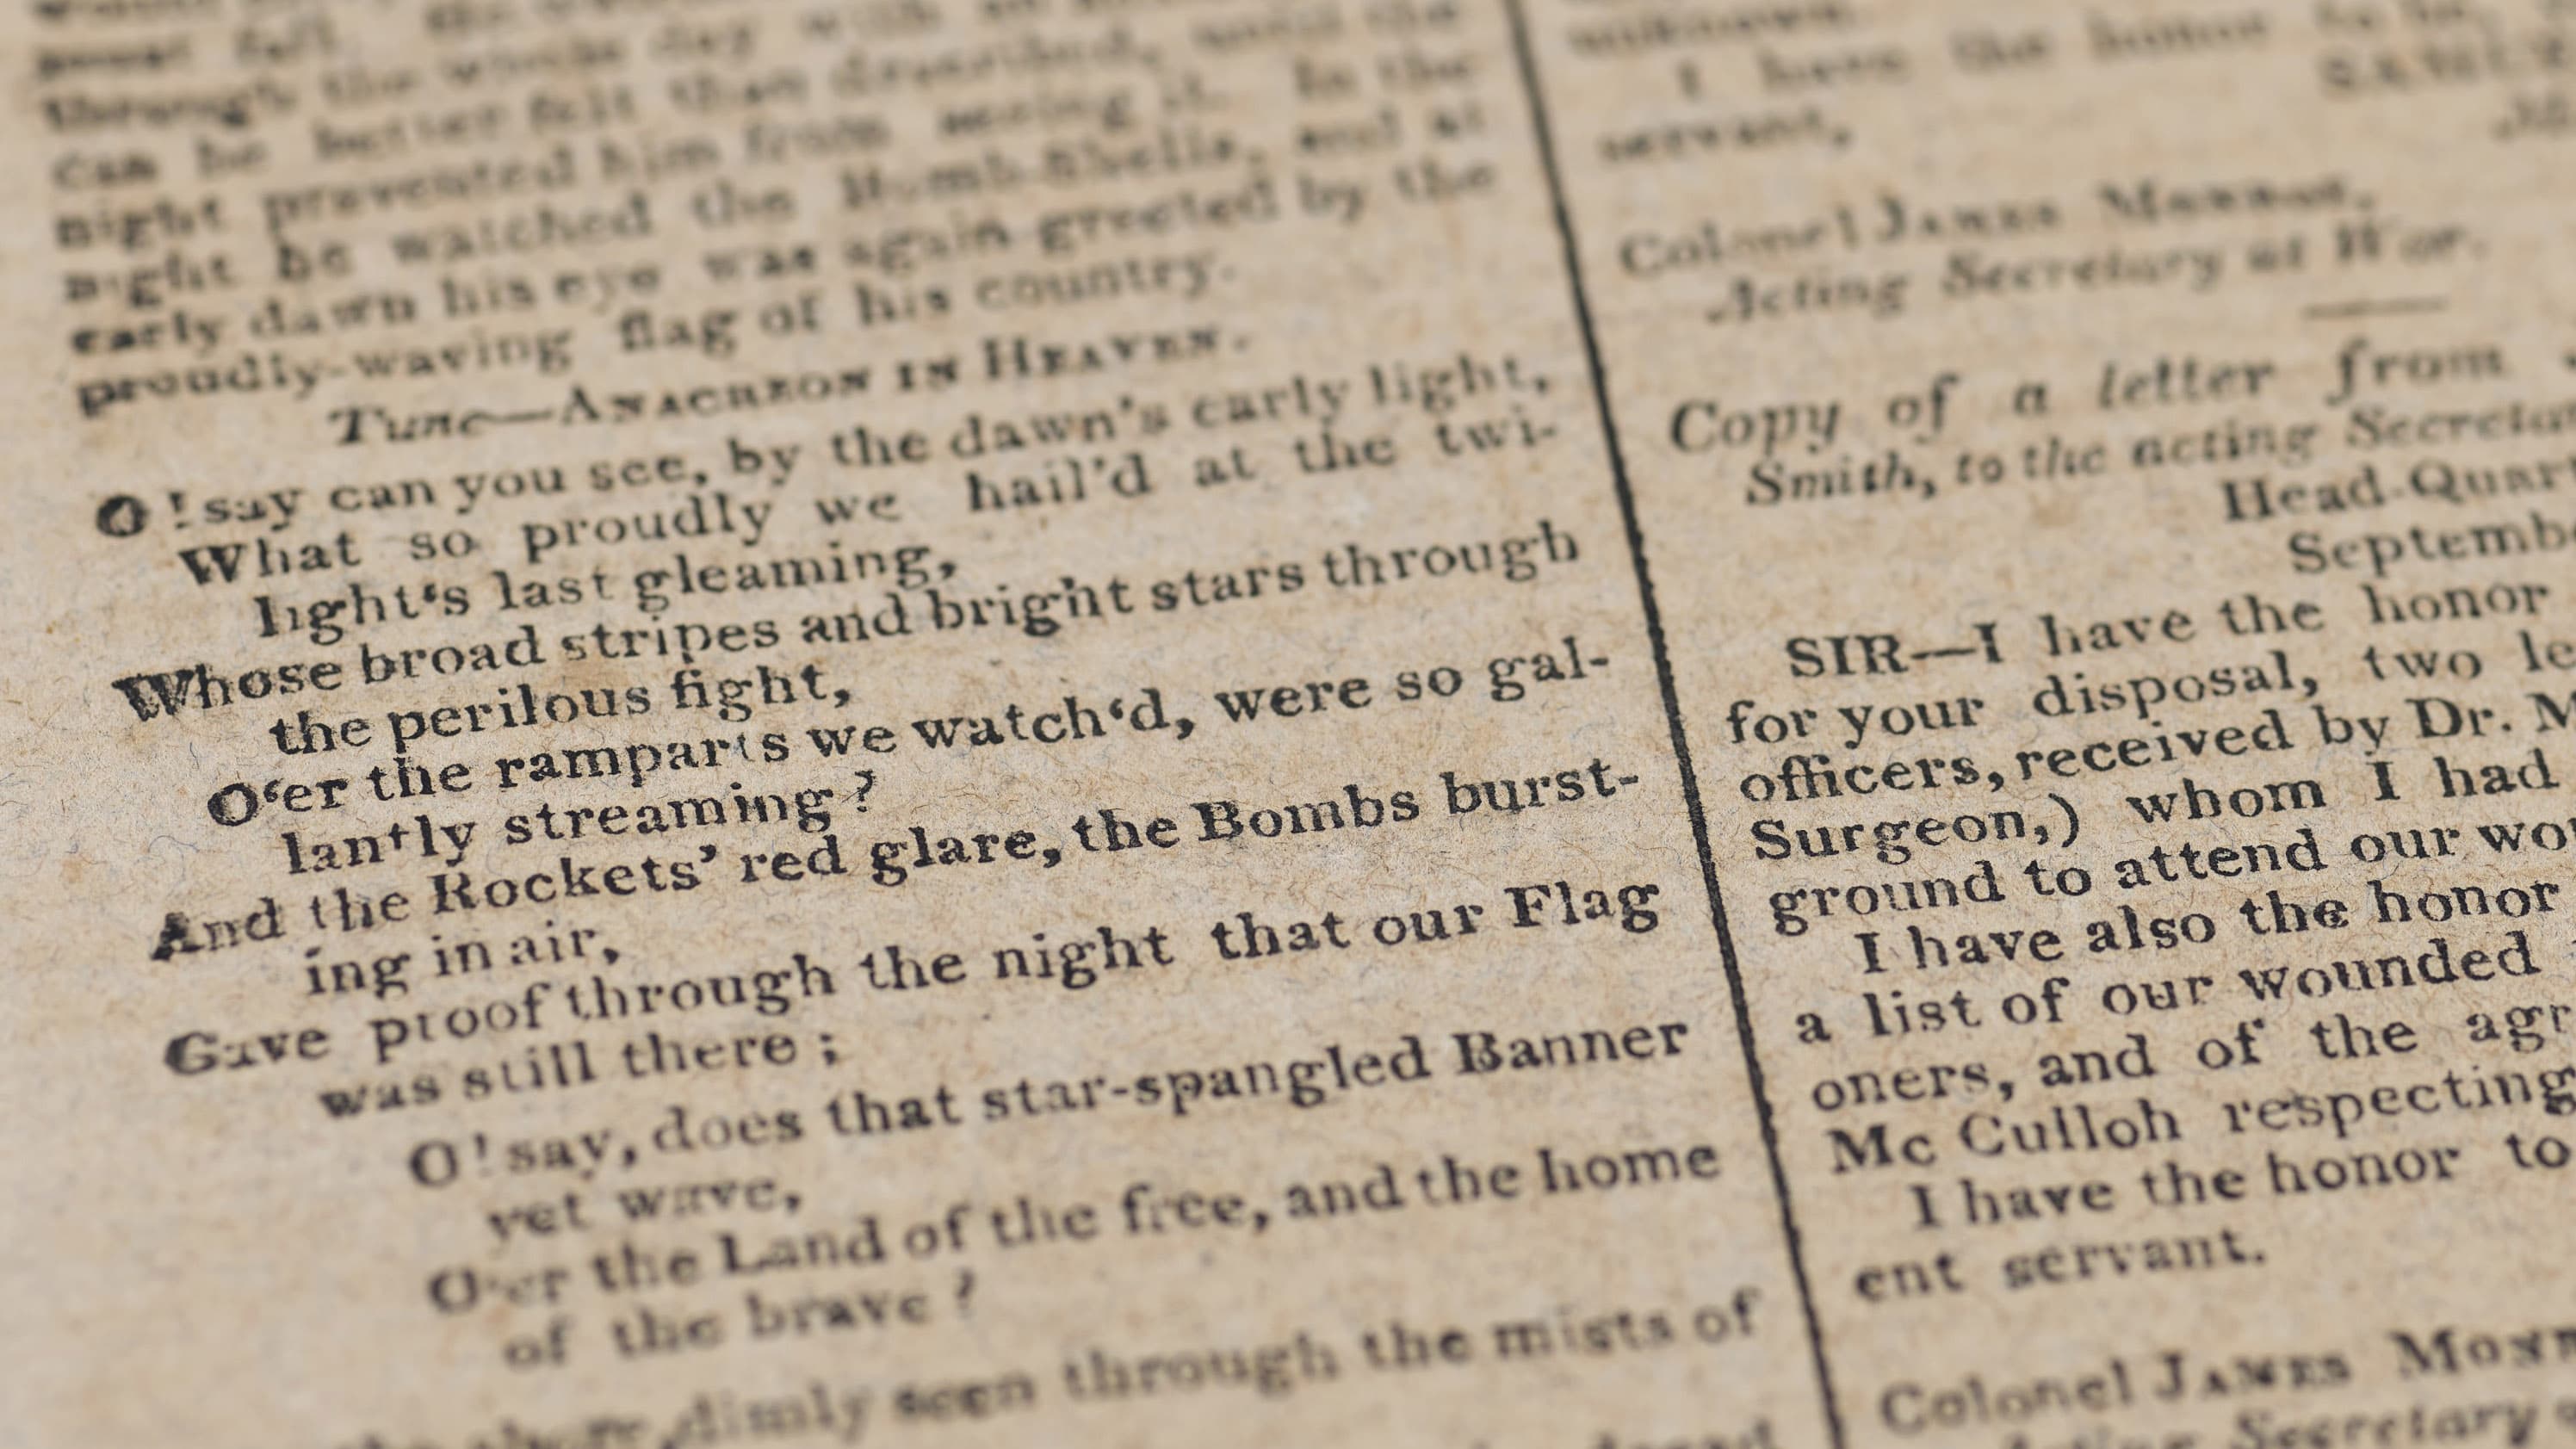 The first printing of "The Star-Spangled Banner" by Francis Scott Key appeared in 1814. The the American Antiquarian Society is selling one of its two copies. (Courtesy Christie's)